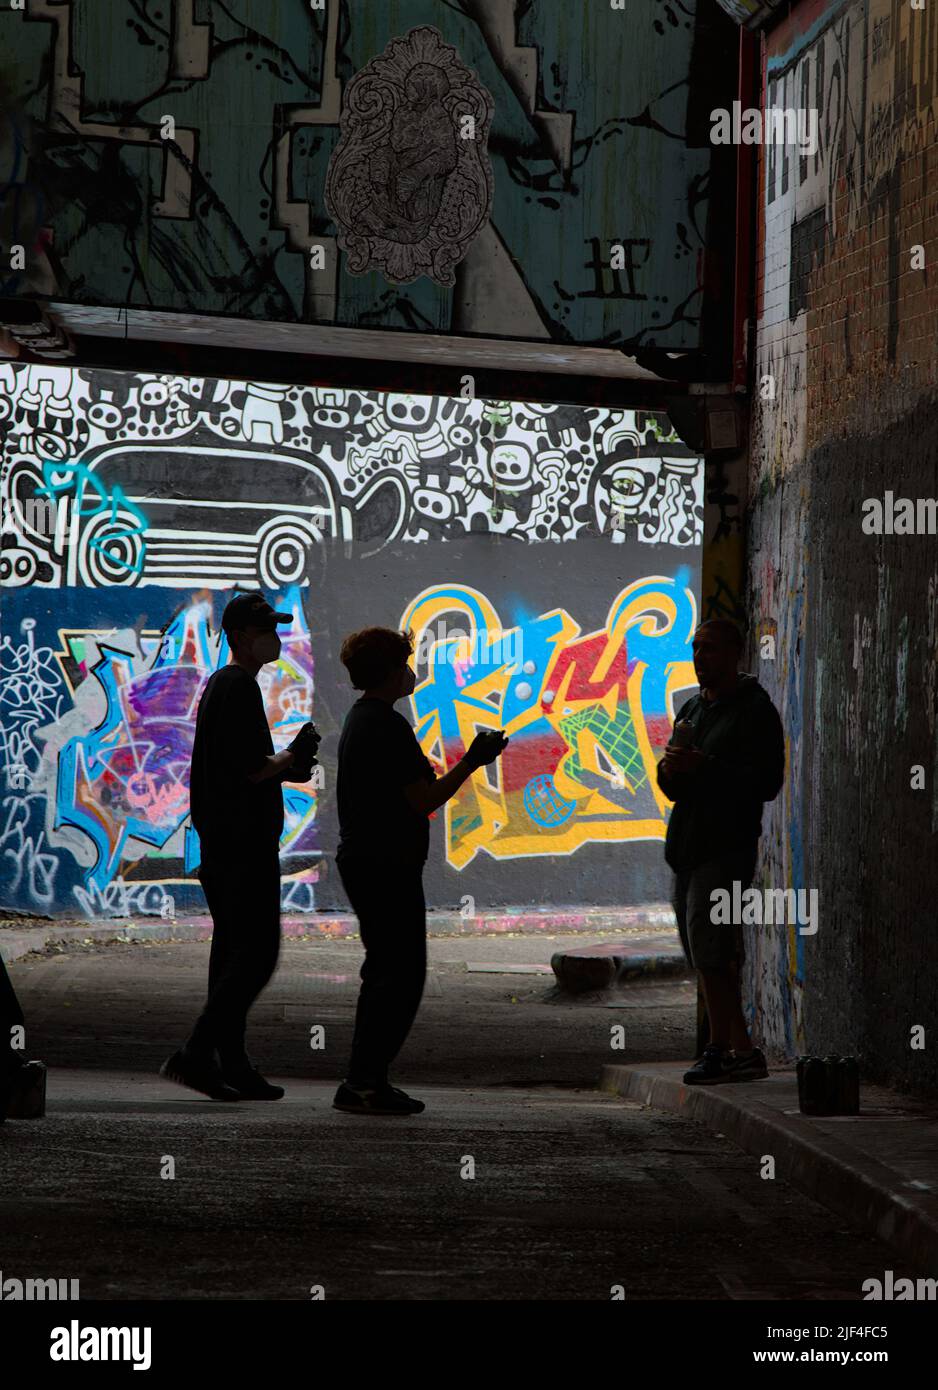 Silhouette Of Graffiti Artists With Spray Cans Under A Bridge In A Tunnel Near Waterloo Station, London UK Stock Photo